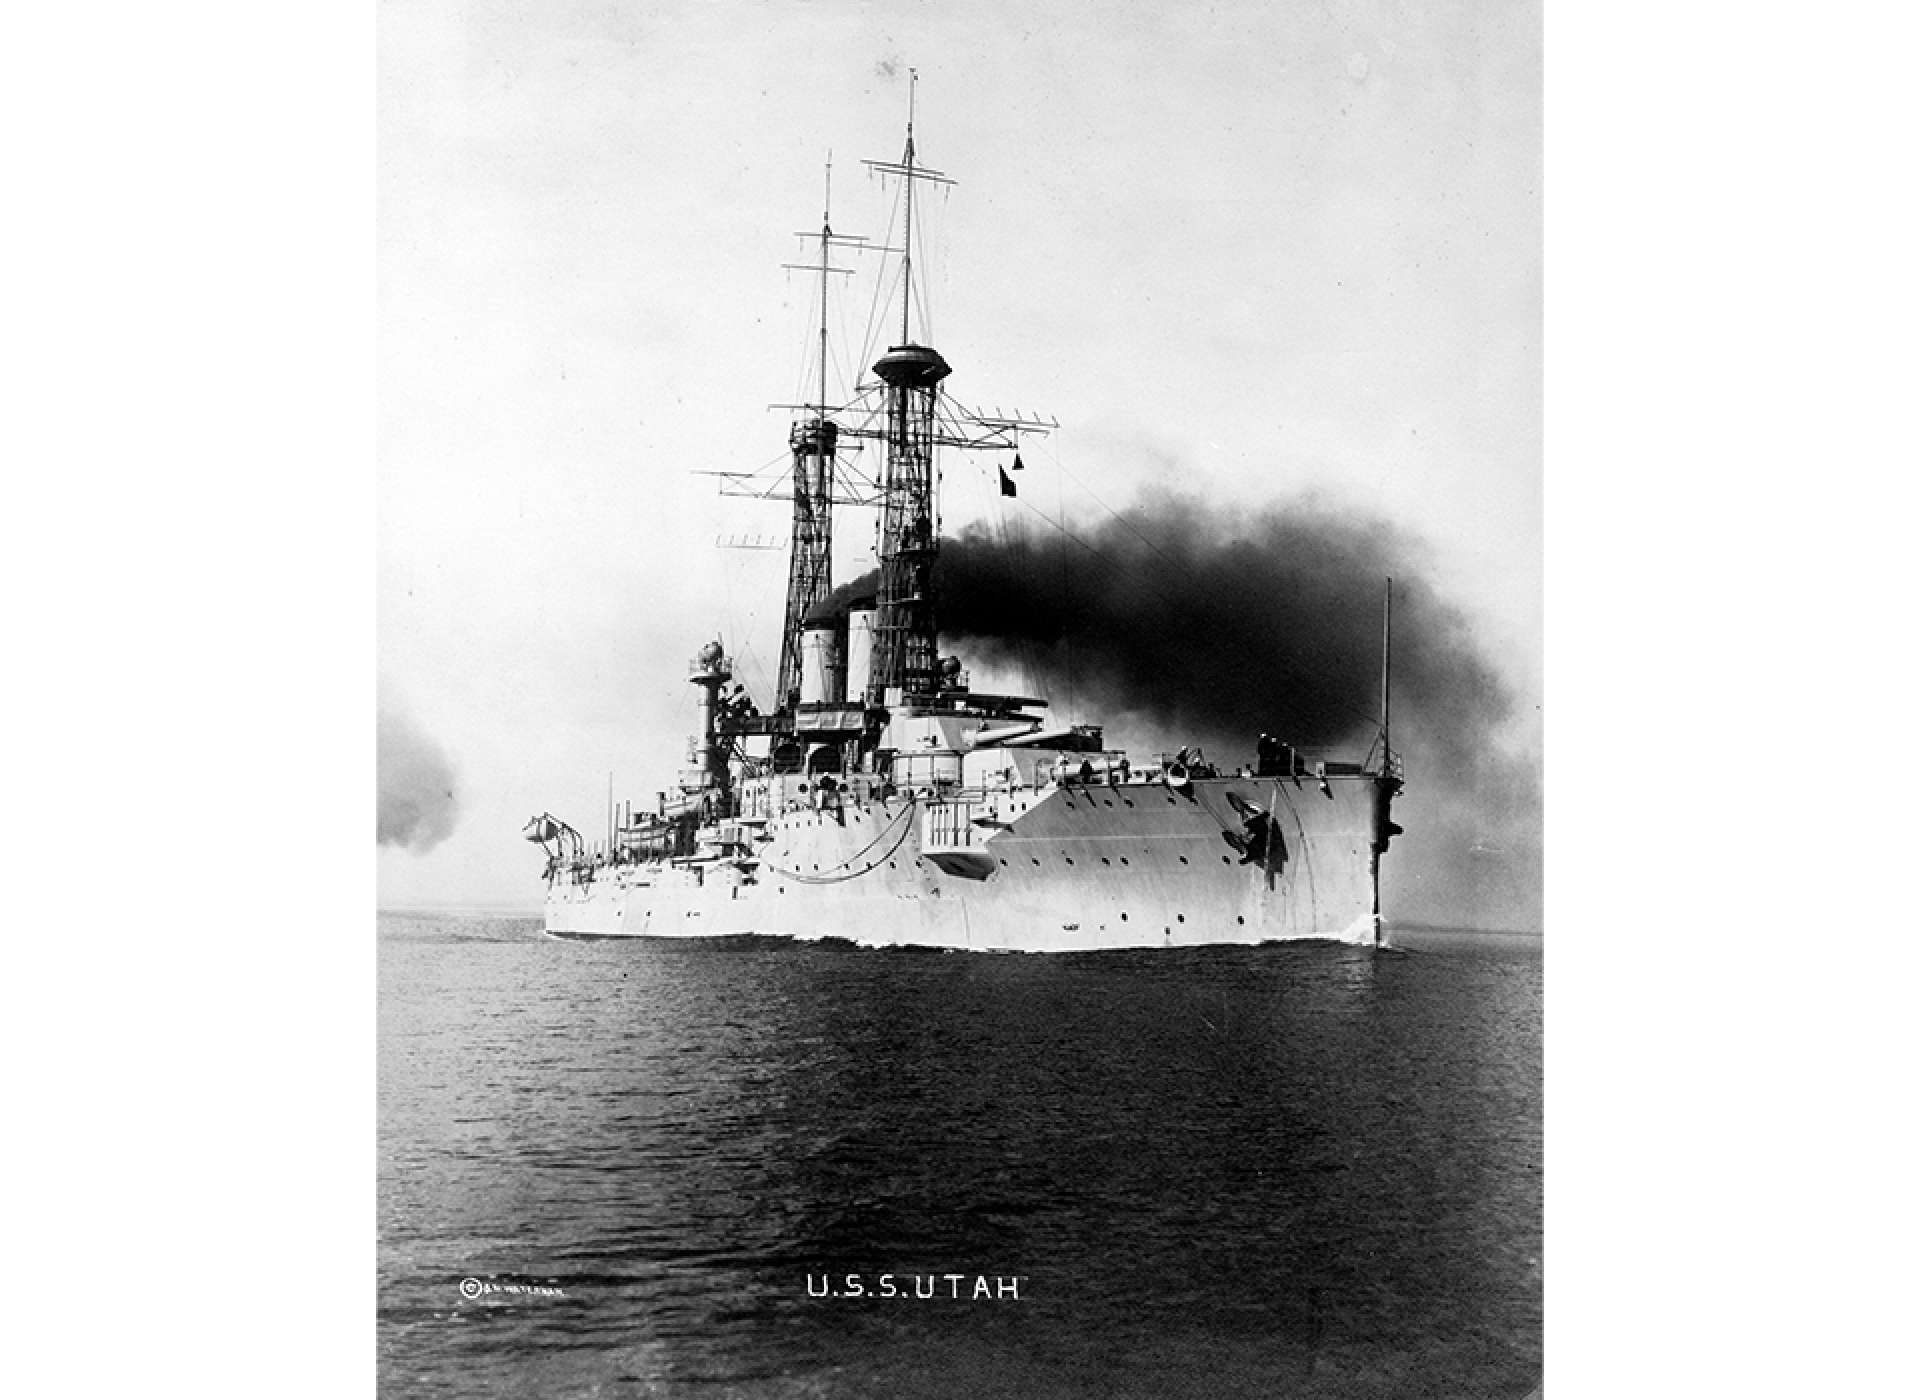  The Utah was nearly as old as Neptune when it was lost at Pearl Harbor. This image was shot of the vessel before the start of World War I. Courtesy US Naval History and Heritage Command.